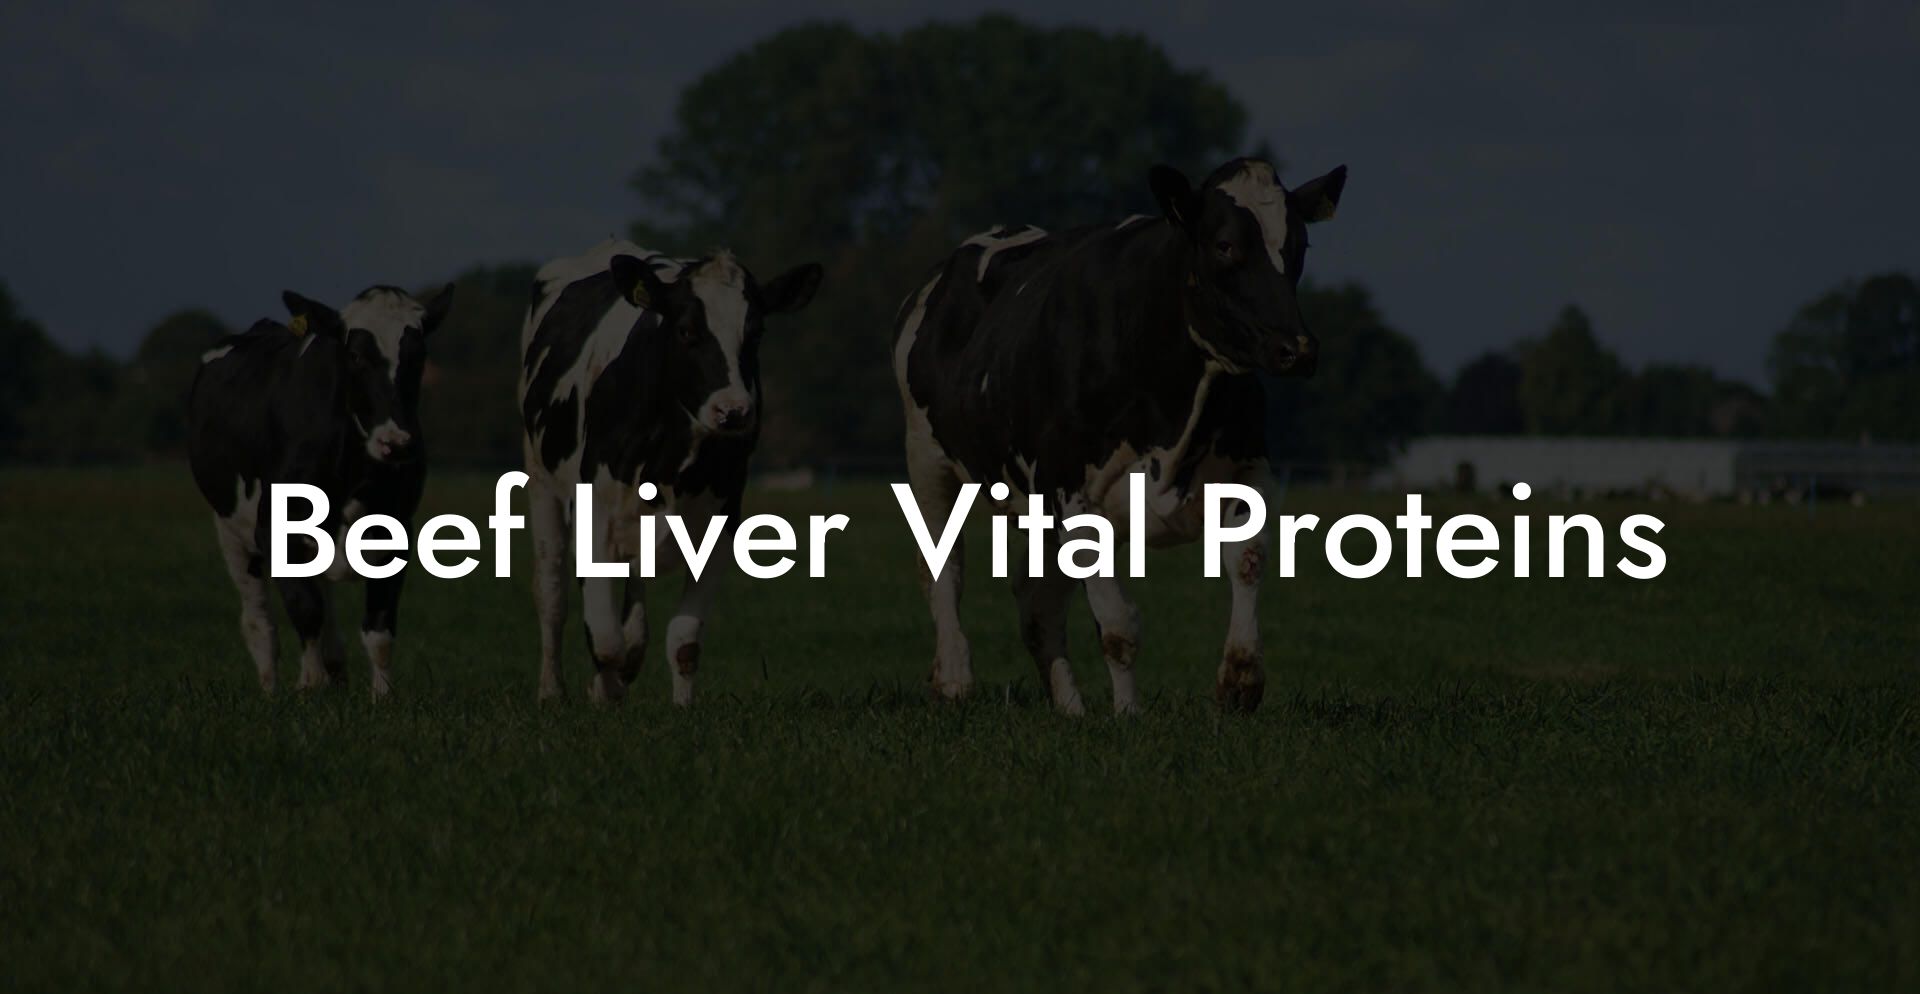 Beef Liver Vital Proteins